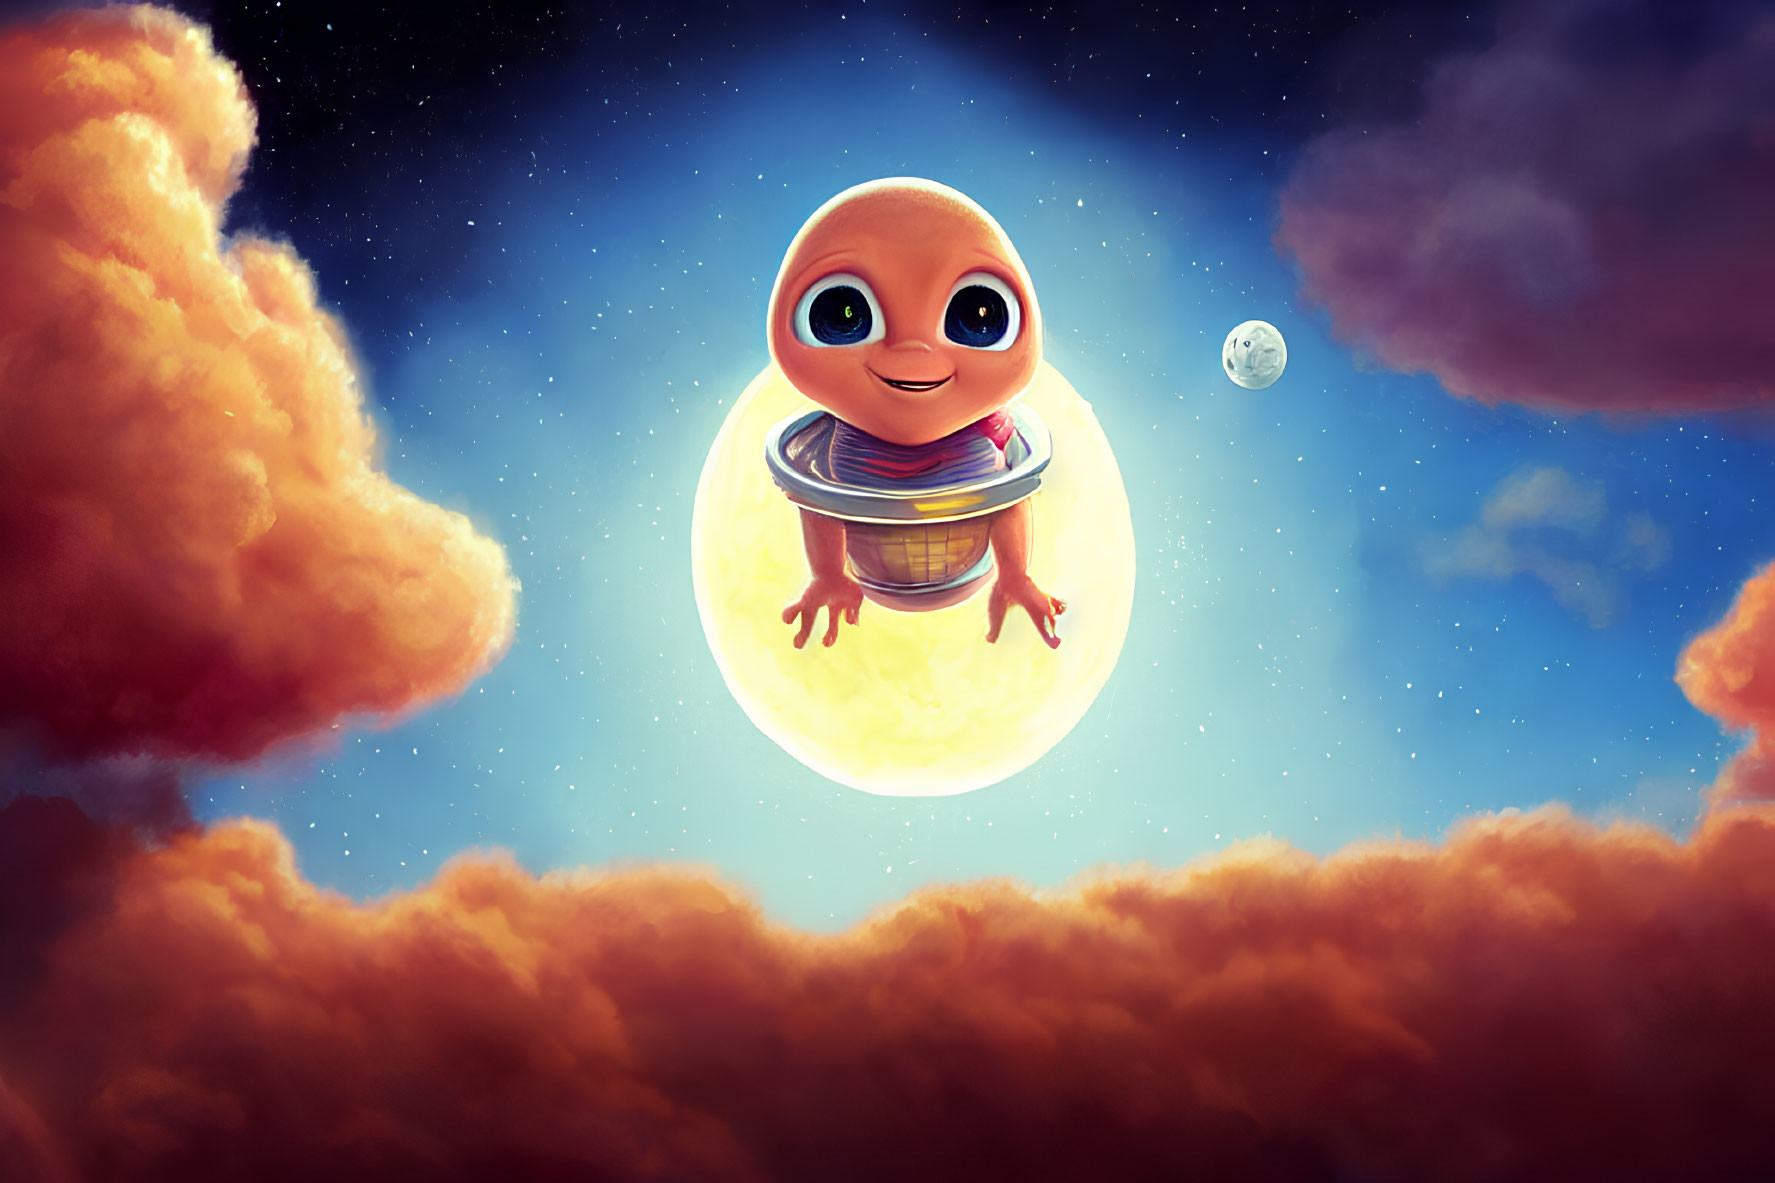 Cute alien character floating on crescent above clouds